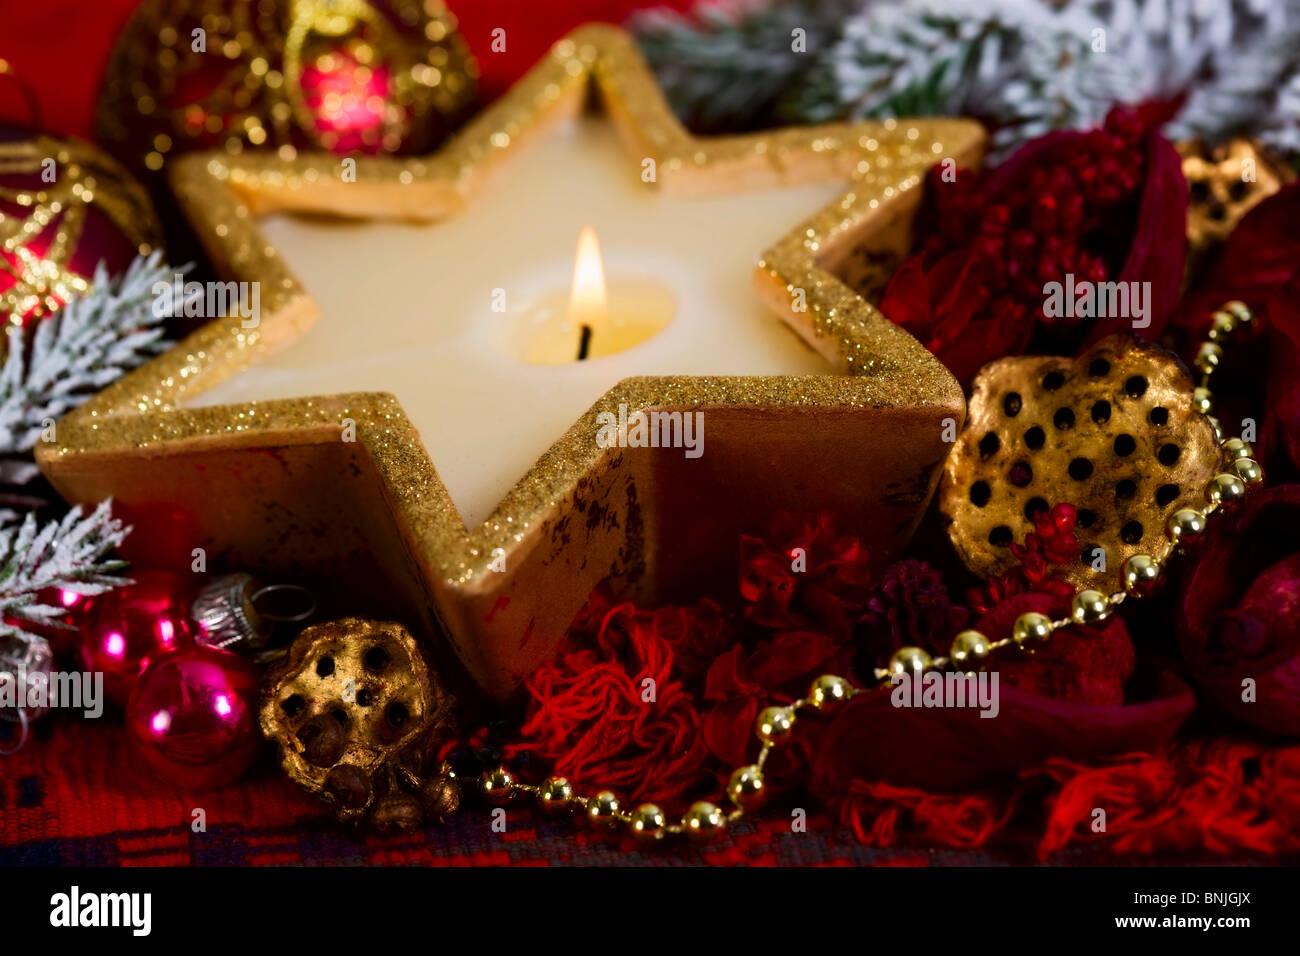 Genre Advent Burn Burning Candle Candles Celebration Celebrations Christmas Christmas decoration Table decoration Stock Photo